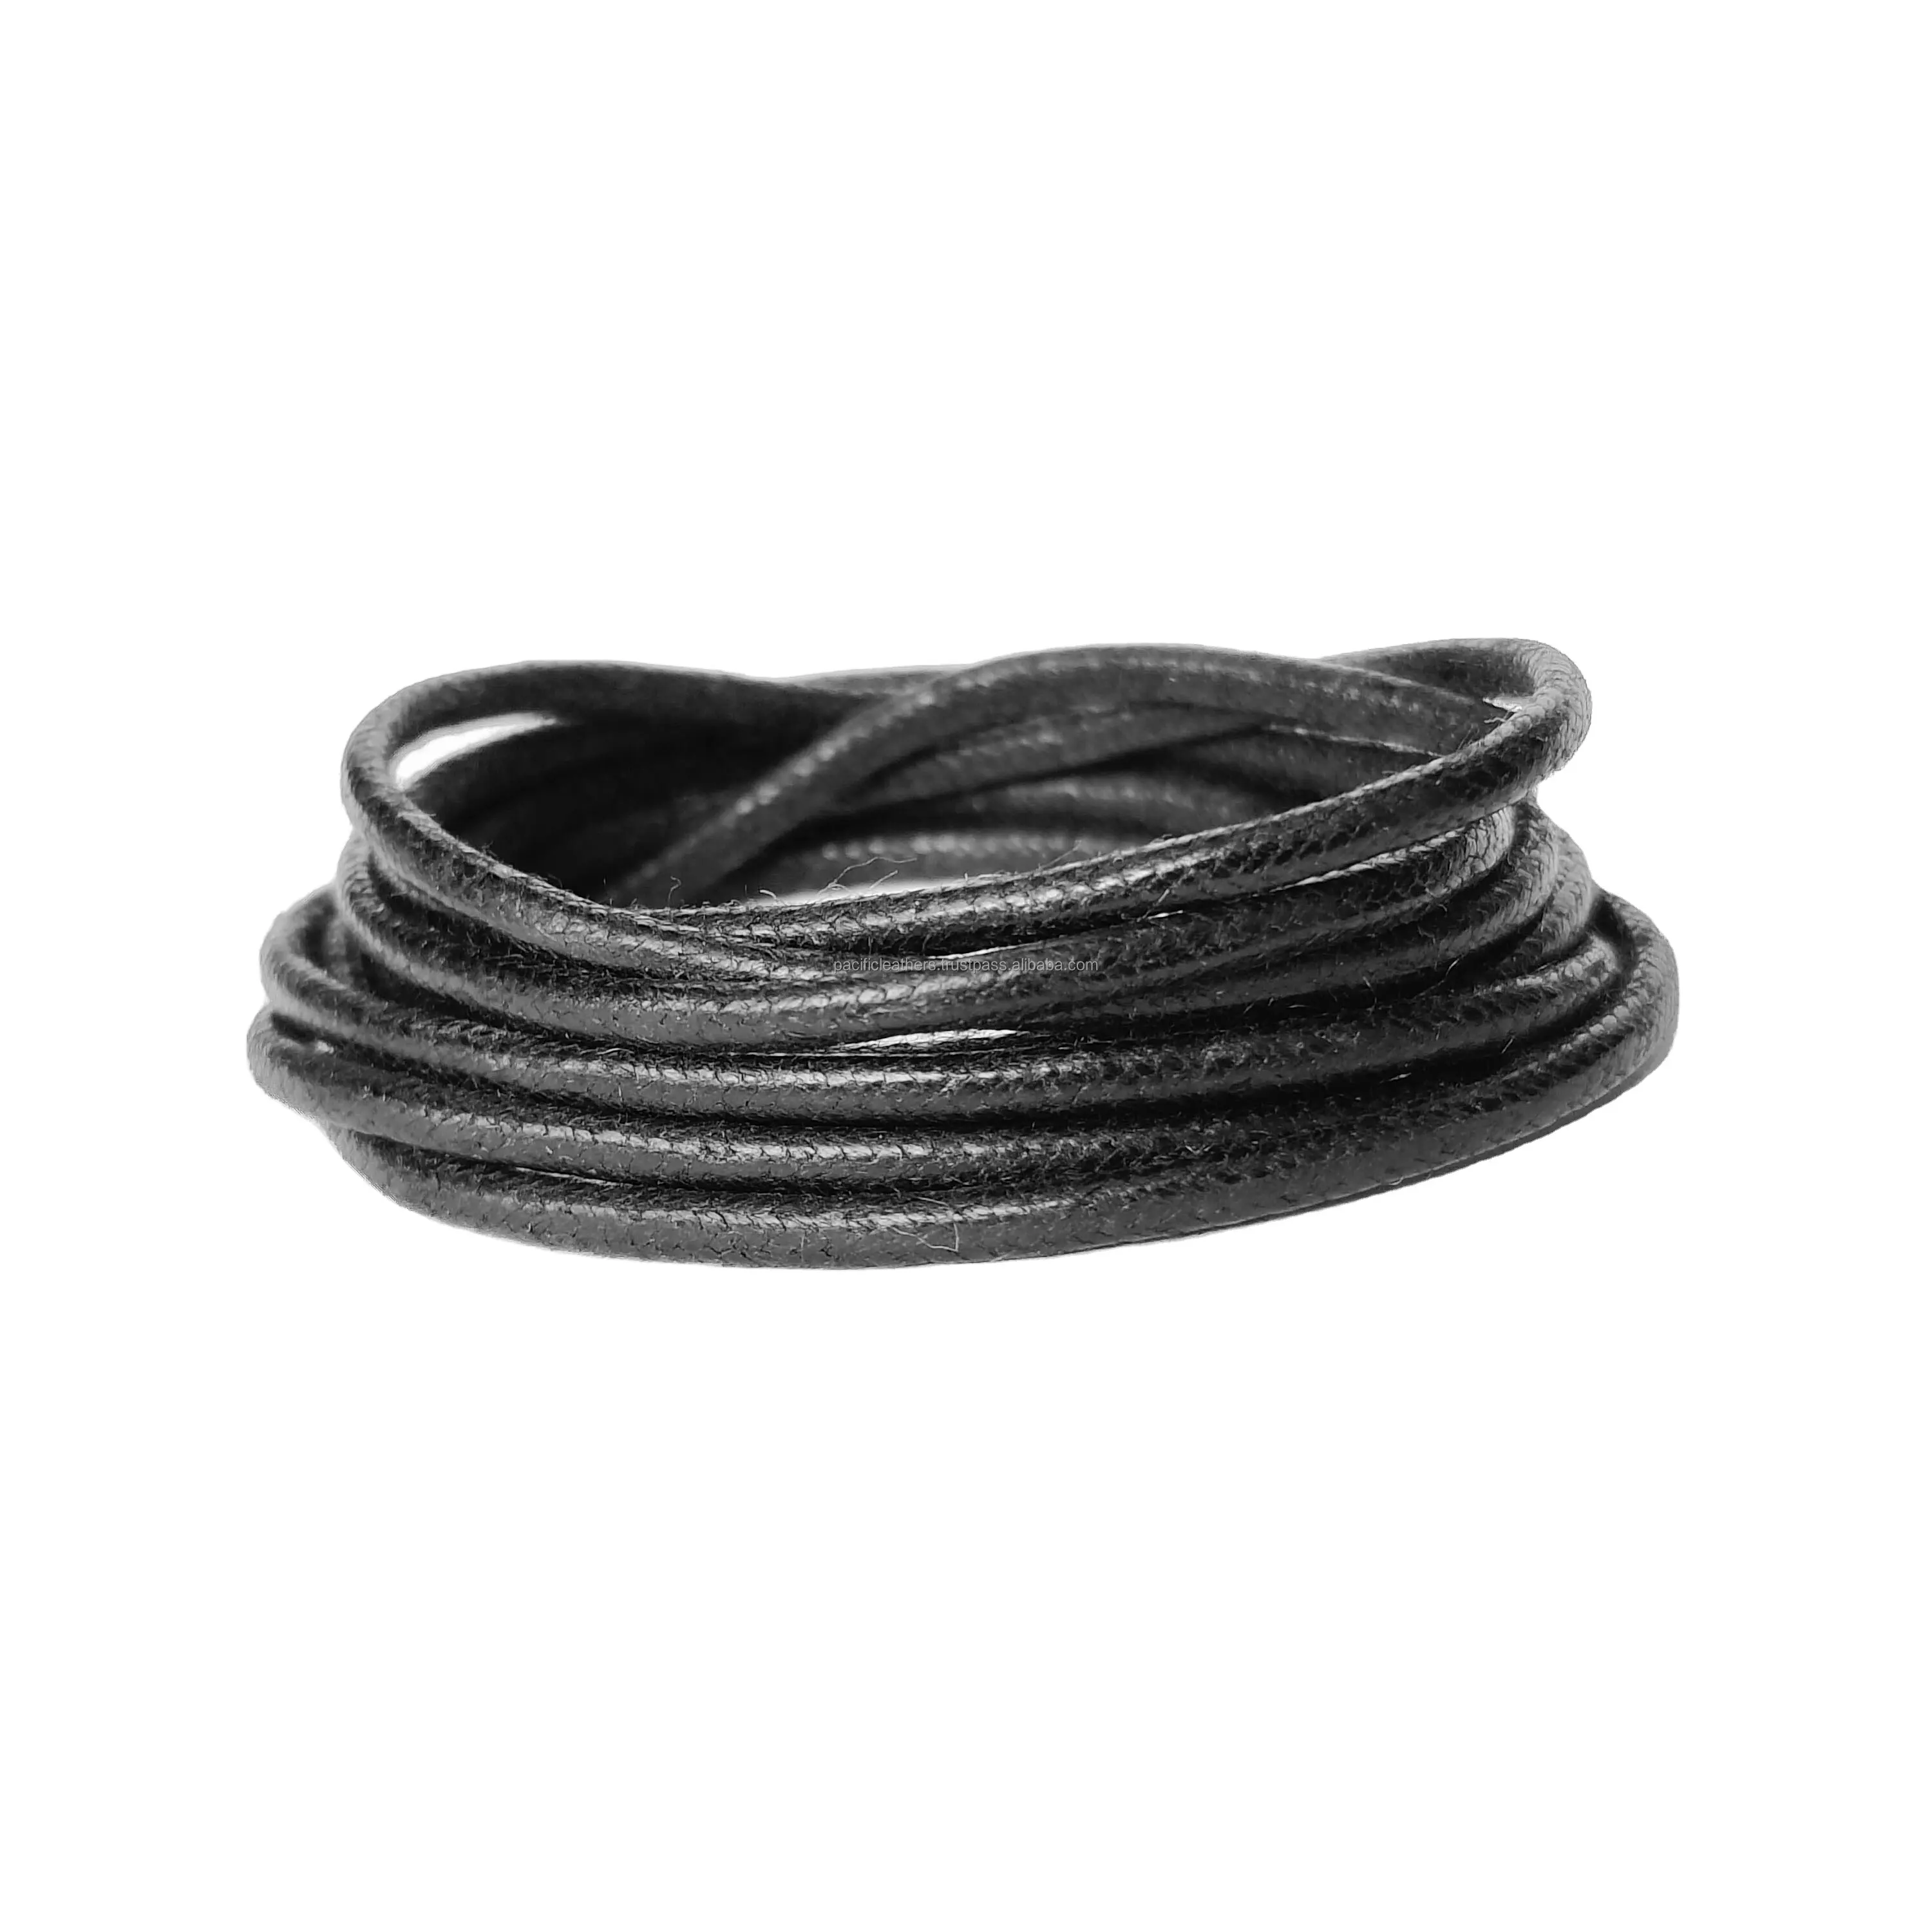 100% Premium Cotton Wax and Non Wax Shoe Laces Round 2.50 mm - 12 mm Fully Customizable for Dress Shoes and Sneakers